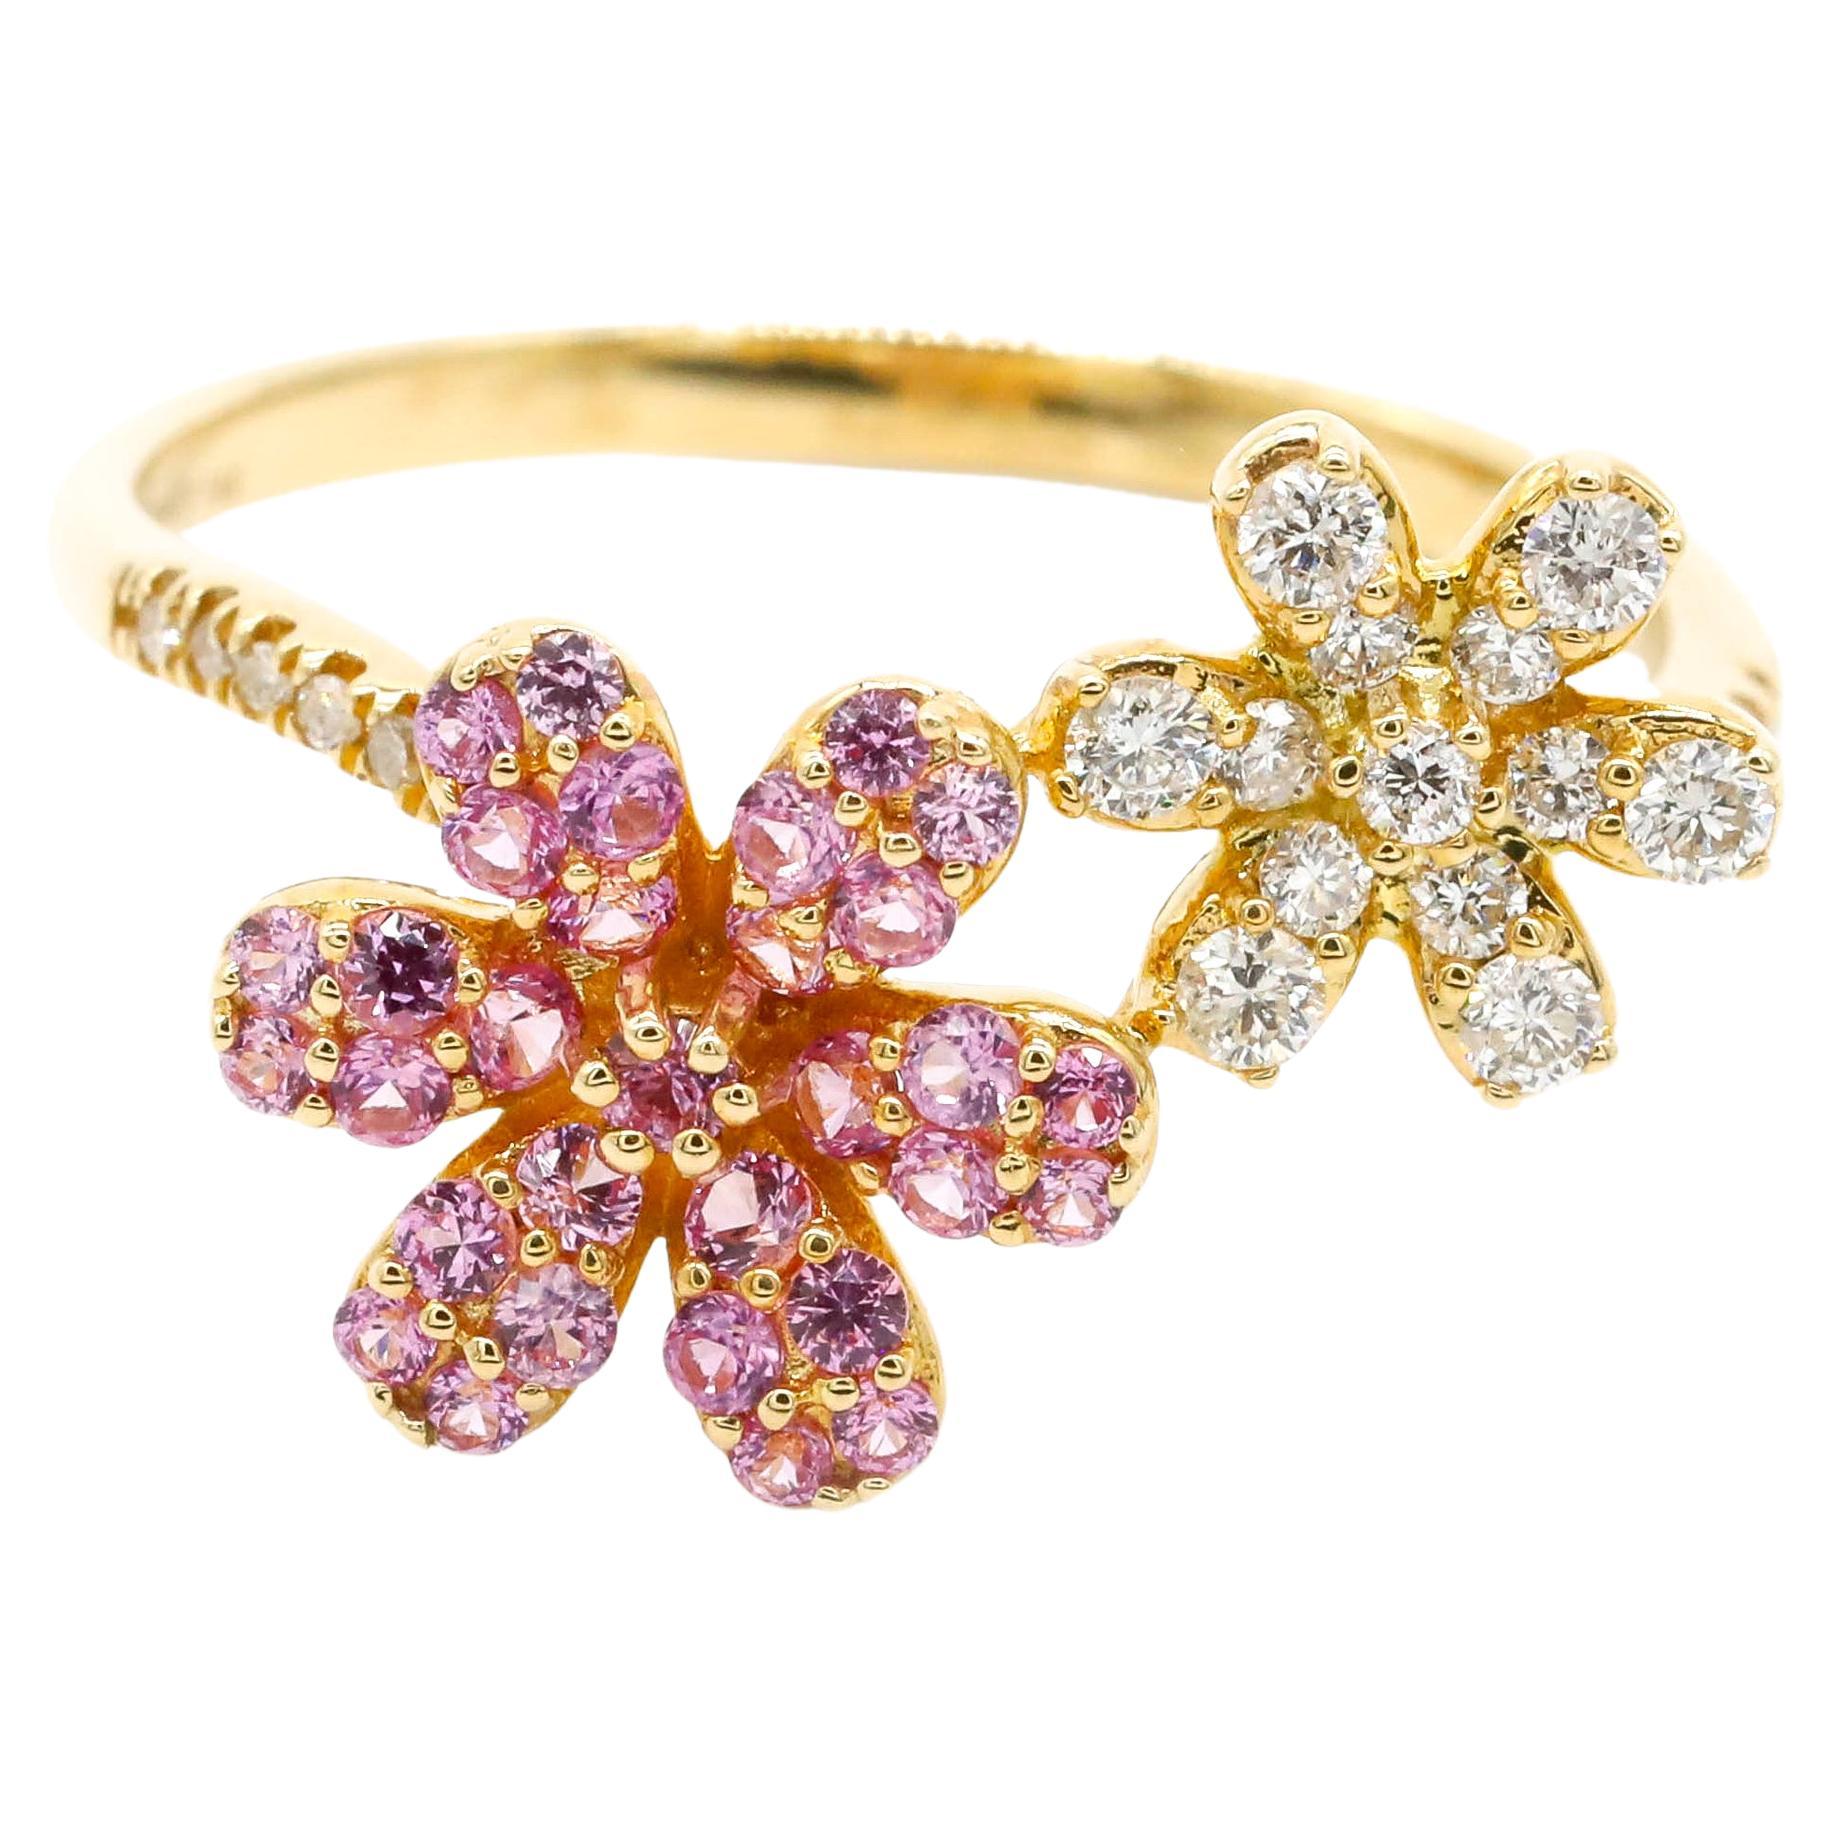 0.23 Carat Diamond Pink Sapphire Pave Daisy Flower 14K Yellow Gold Wrap Ring For Sale